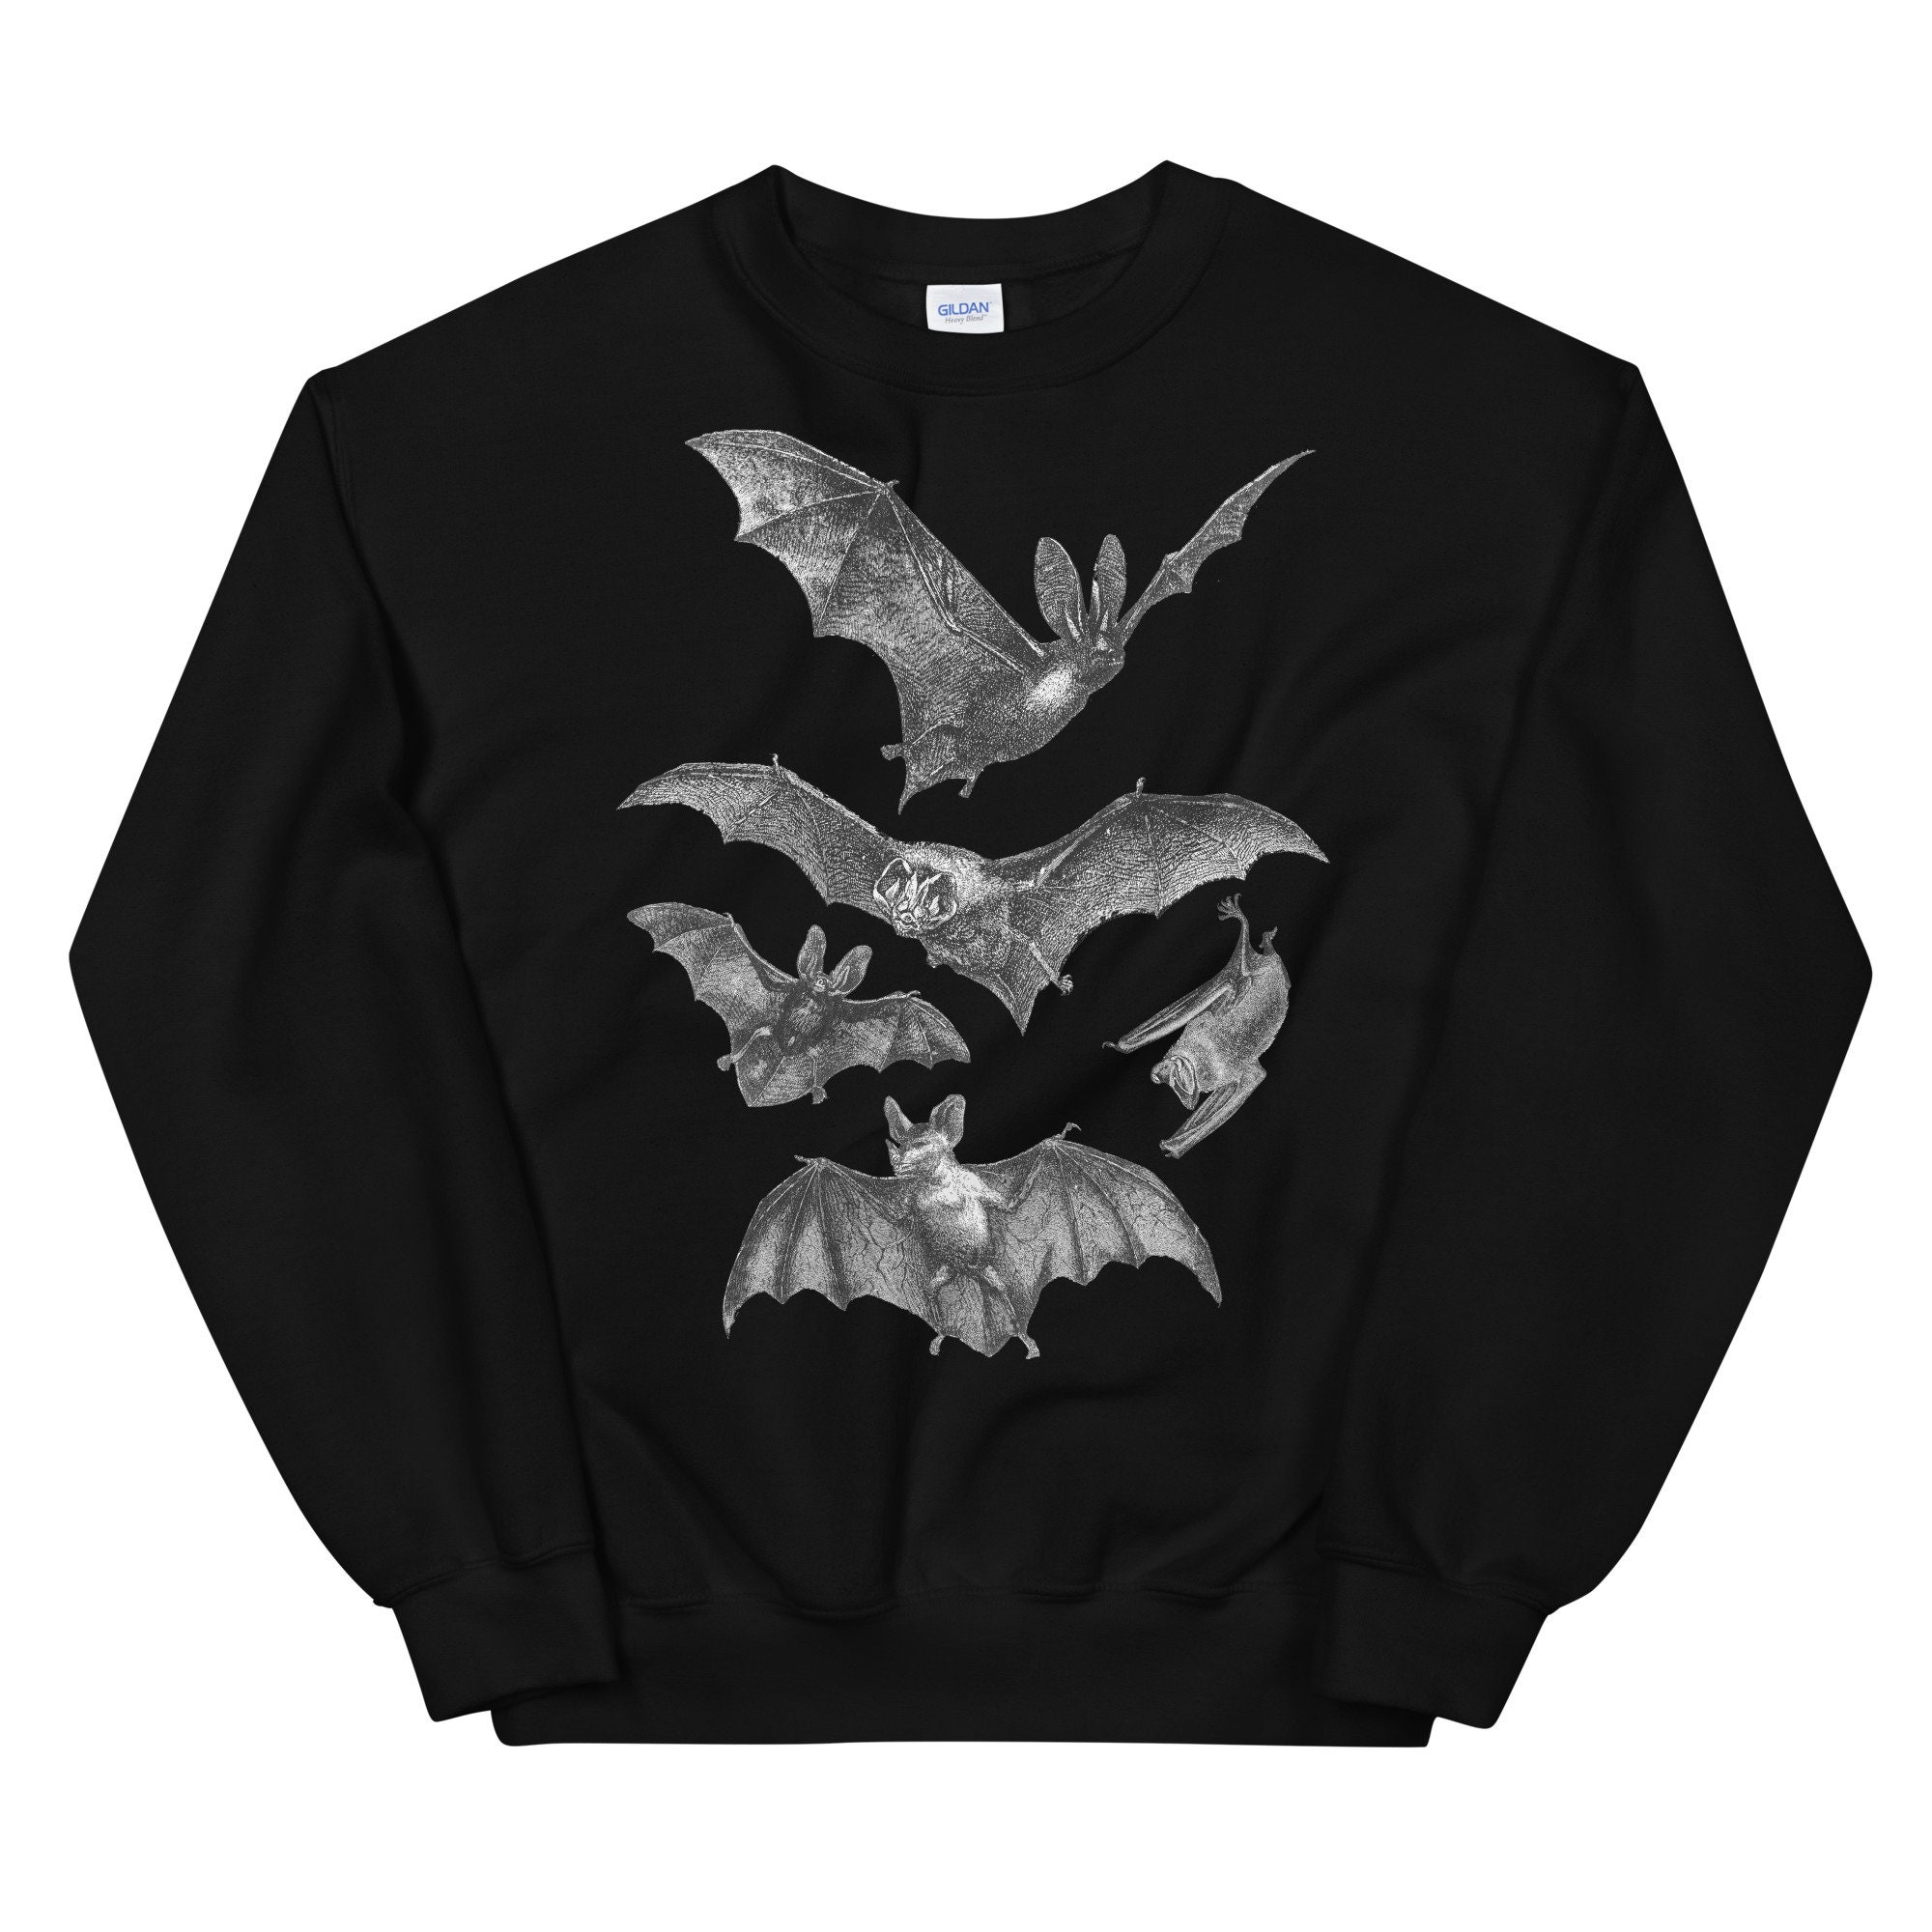 Discover Gothic Sweatshirt | Witchy clothing Pastel goth Dark grunge Tumblr aesthetic Halloween Vampire Bat Vintage | Release the Bats